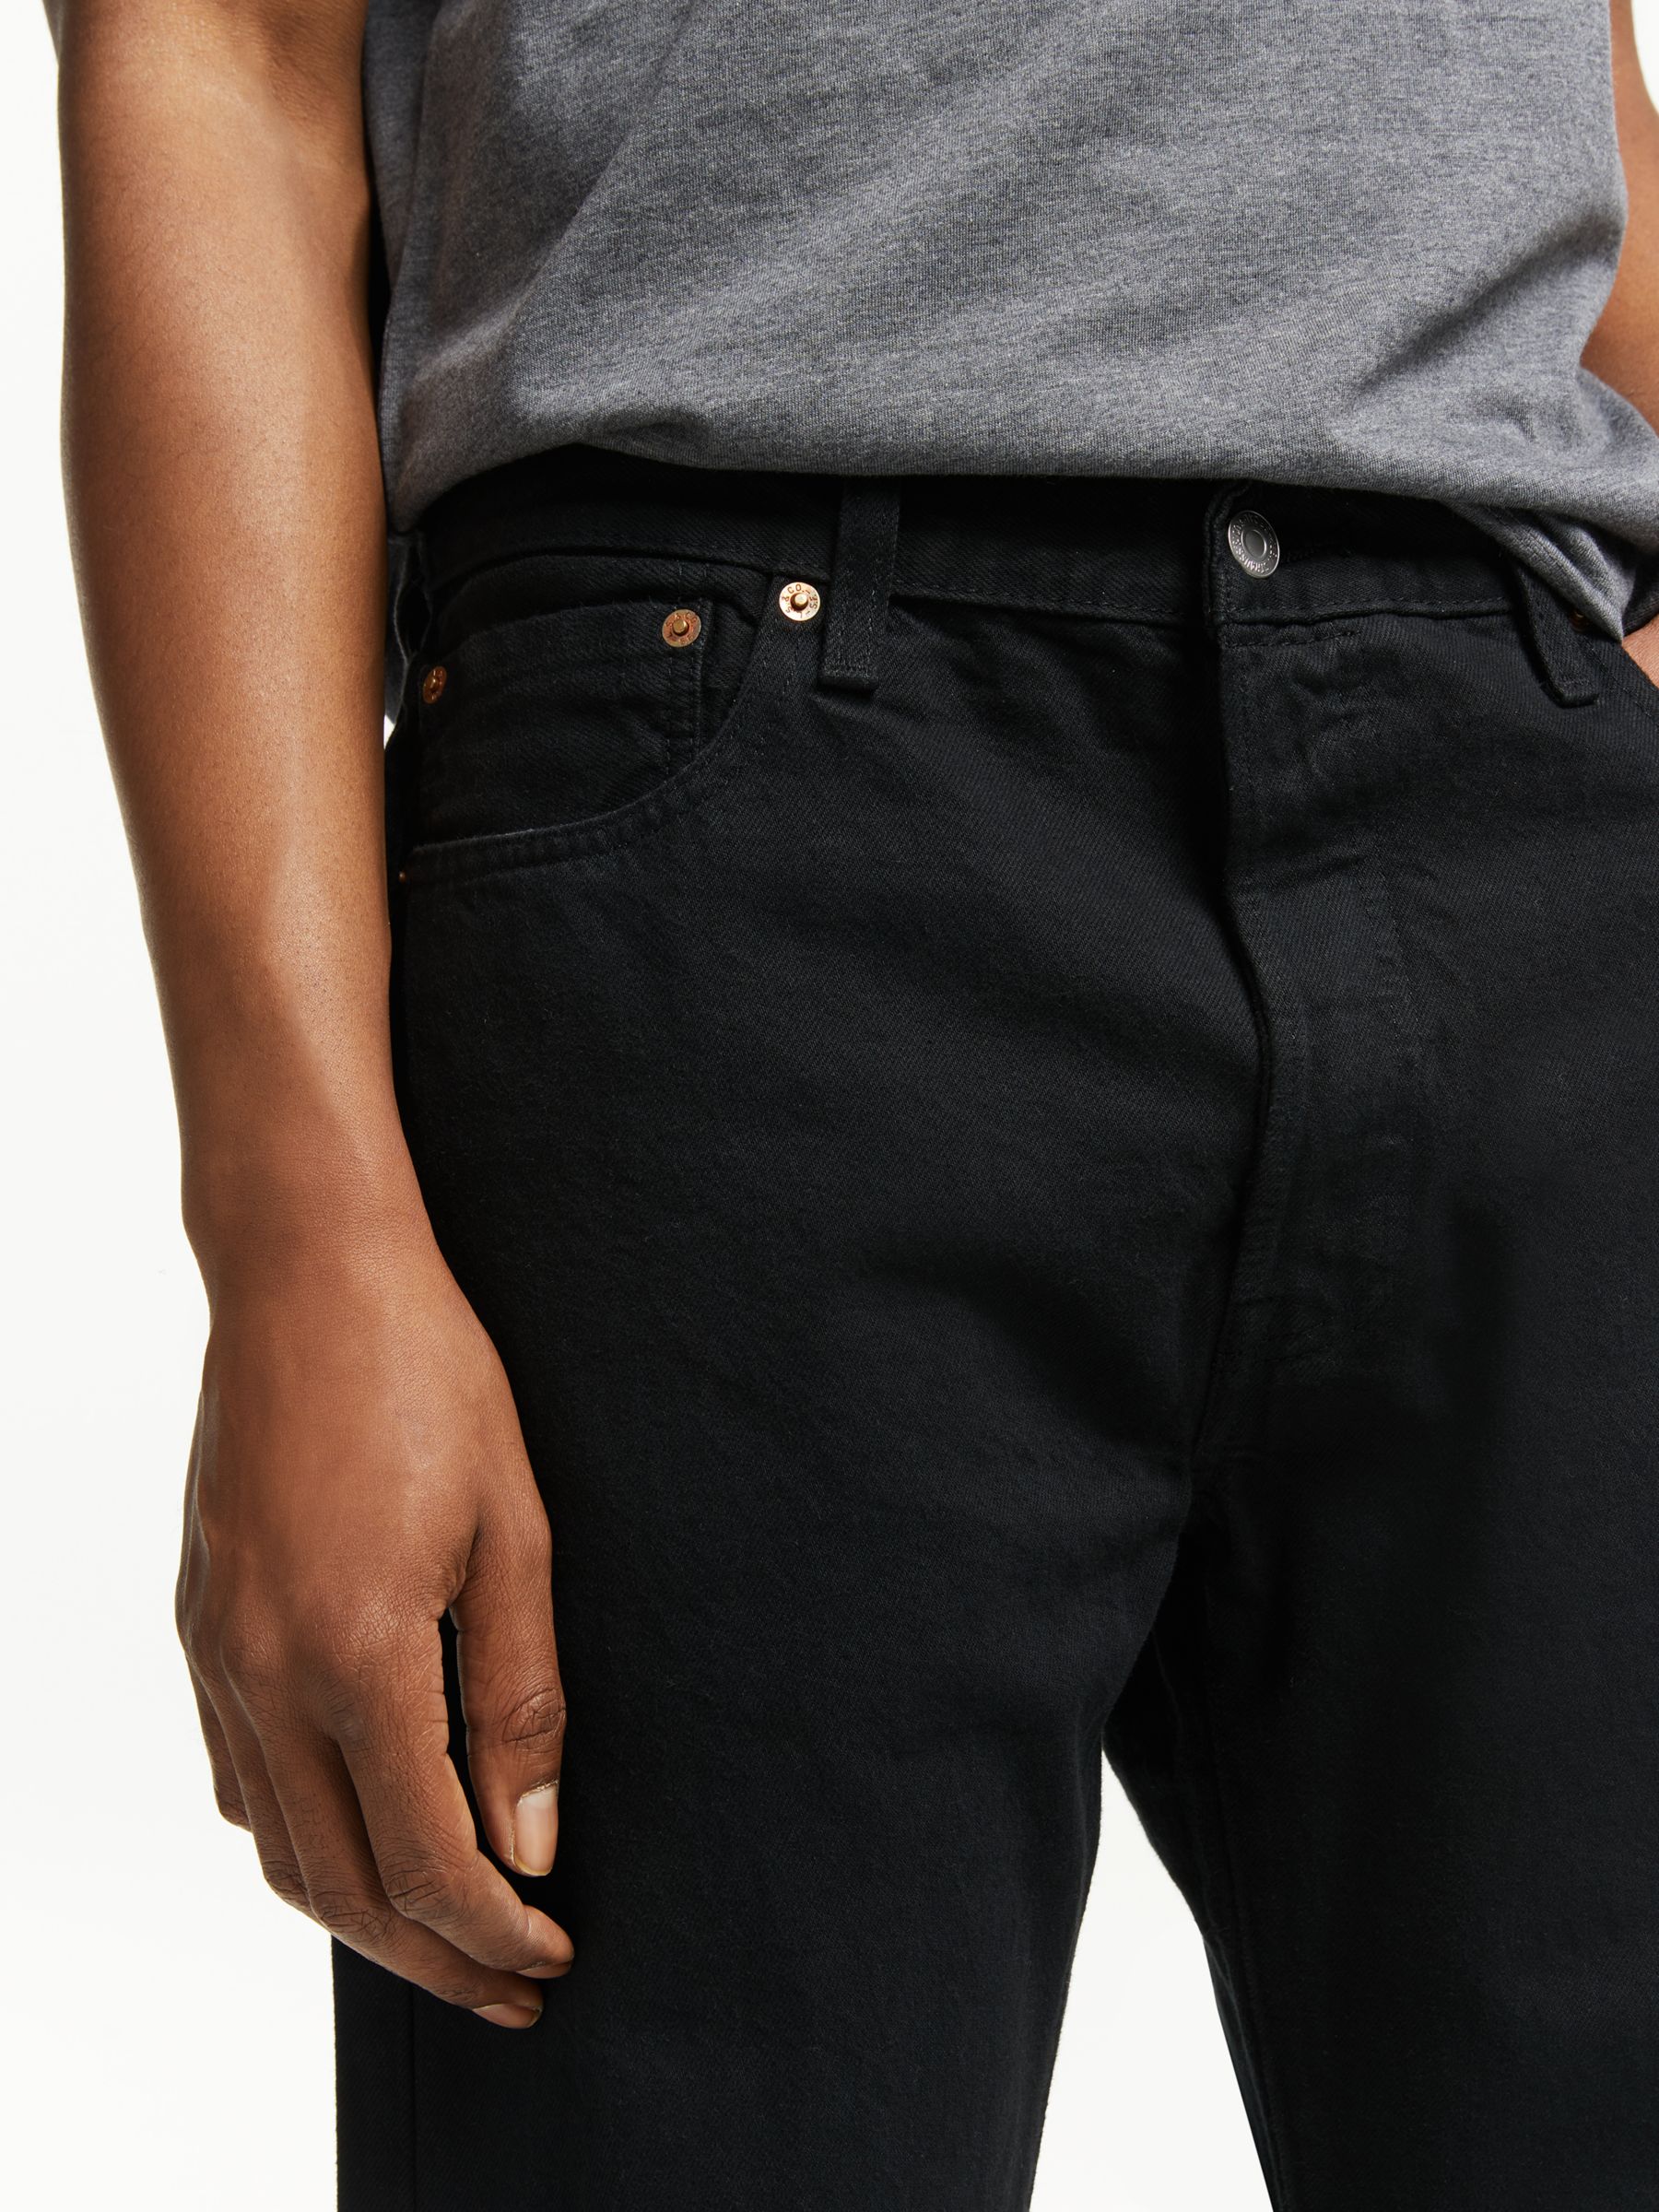 Levis 501 Original Straight Jeans Black At John Lewis And Partners 